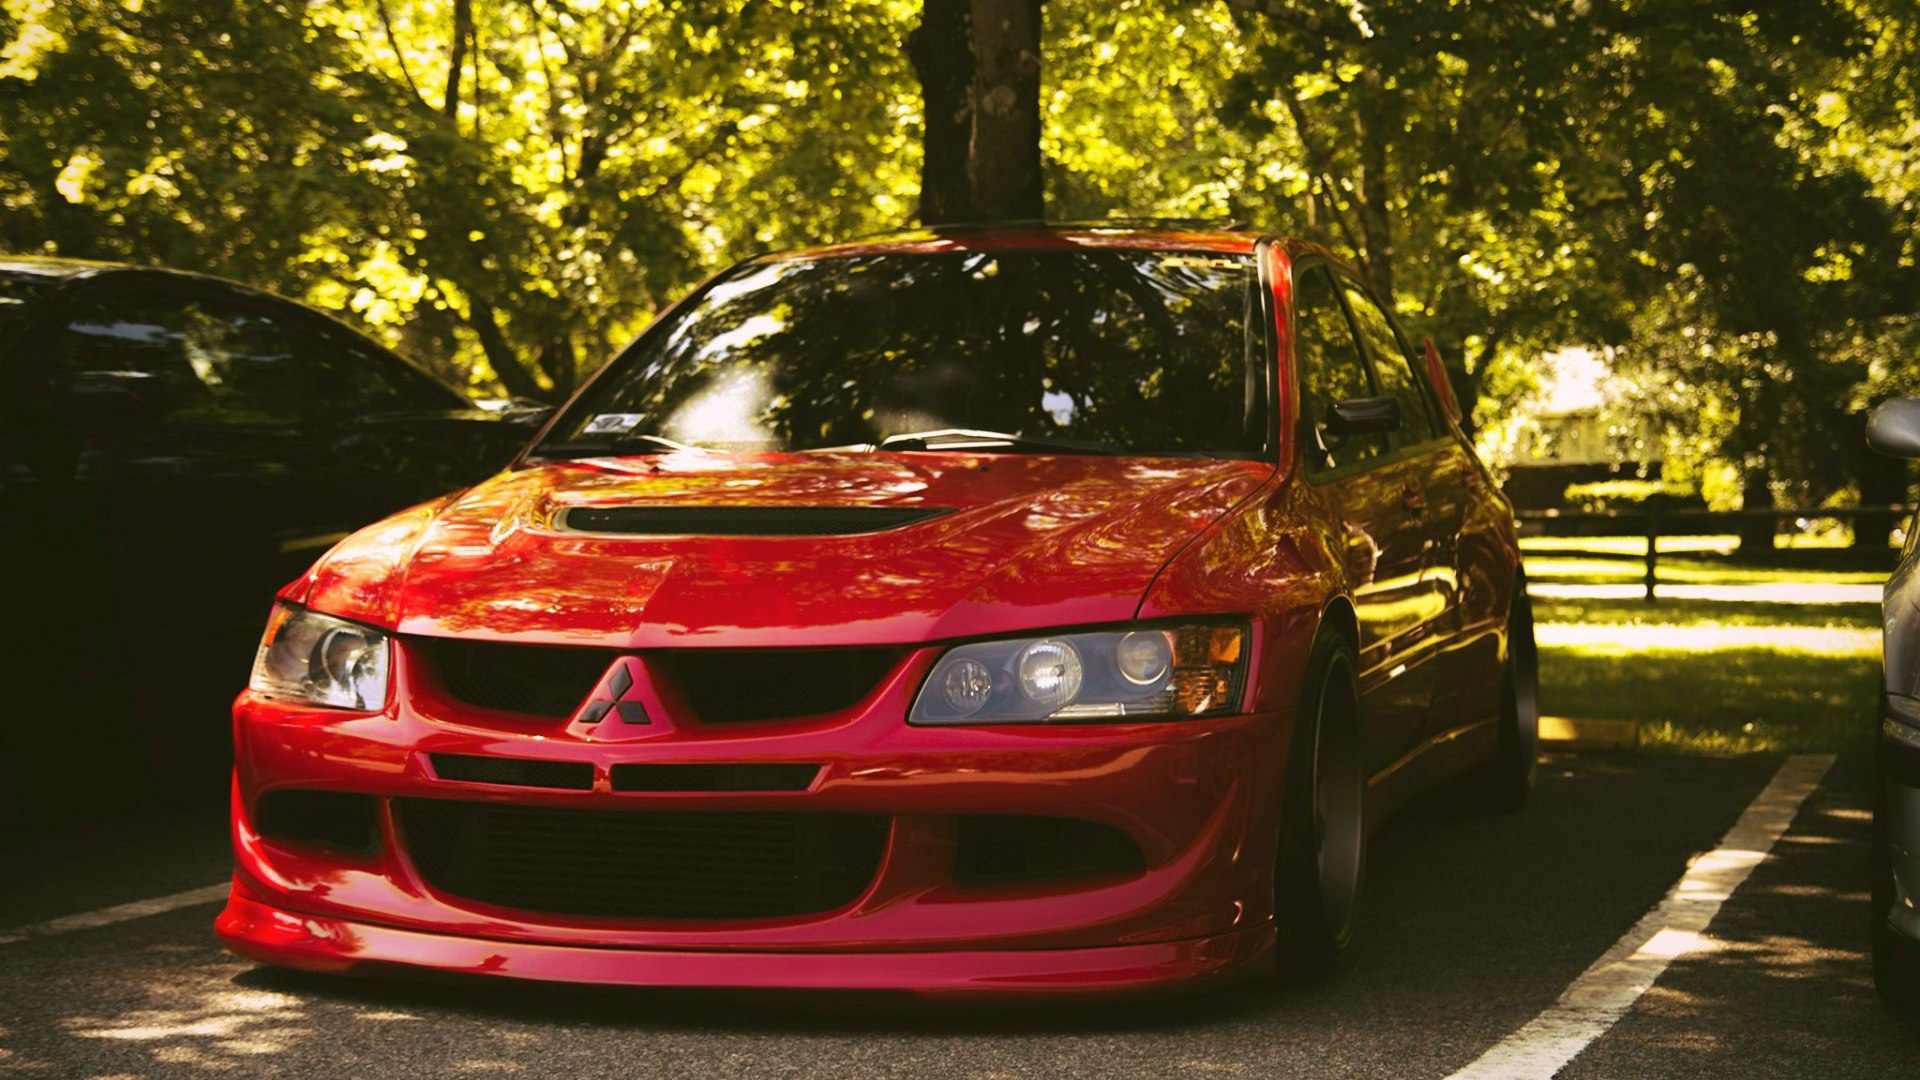 Red Mitsubishi Lancer Evolution IX wallpapers and images ...